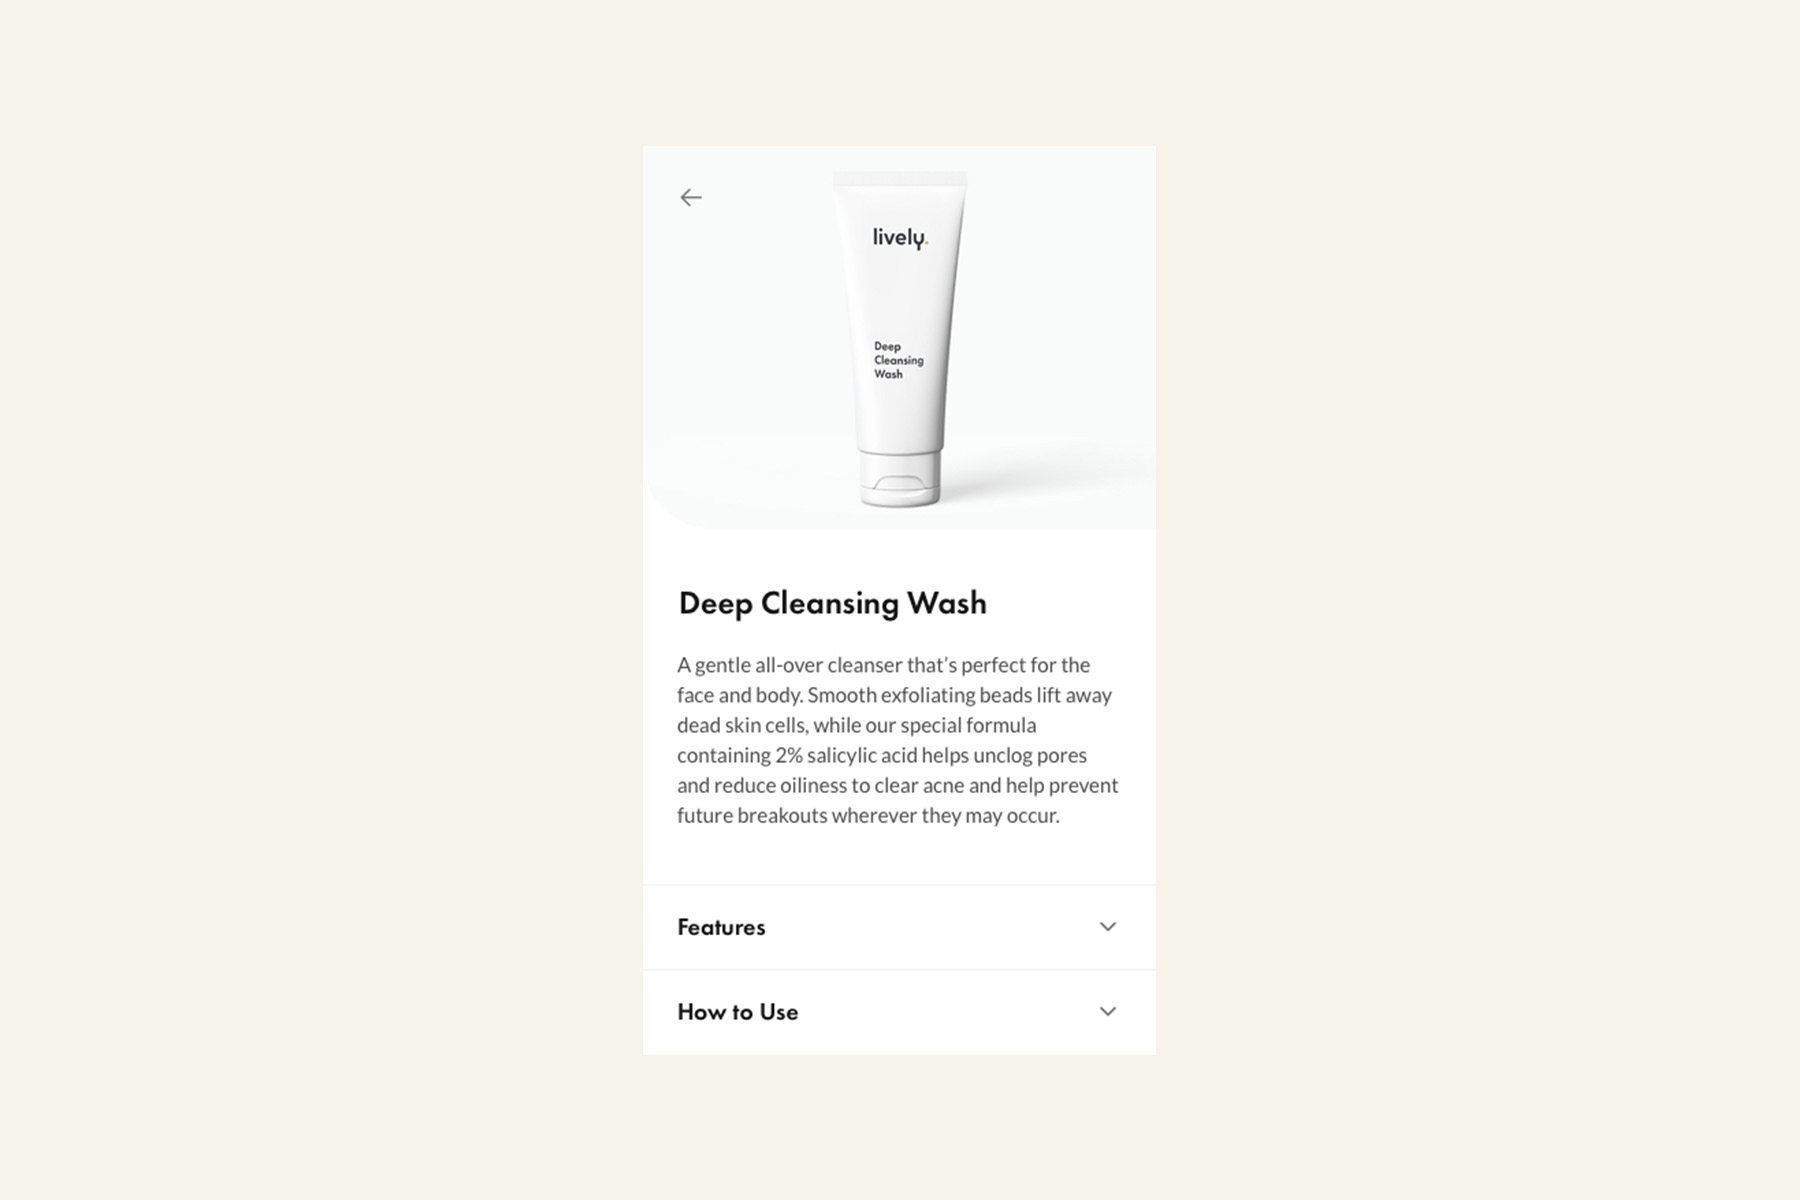 product page for Deep Cleansing Wash with bottle image and details